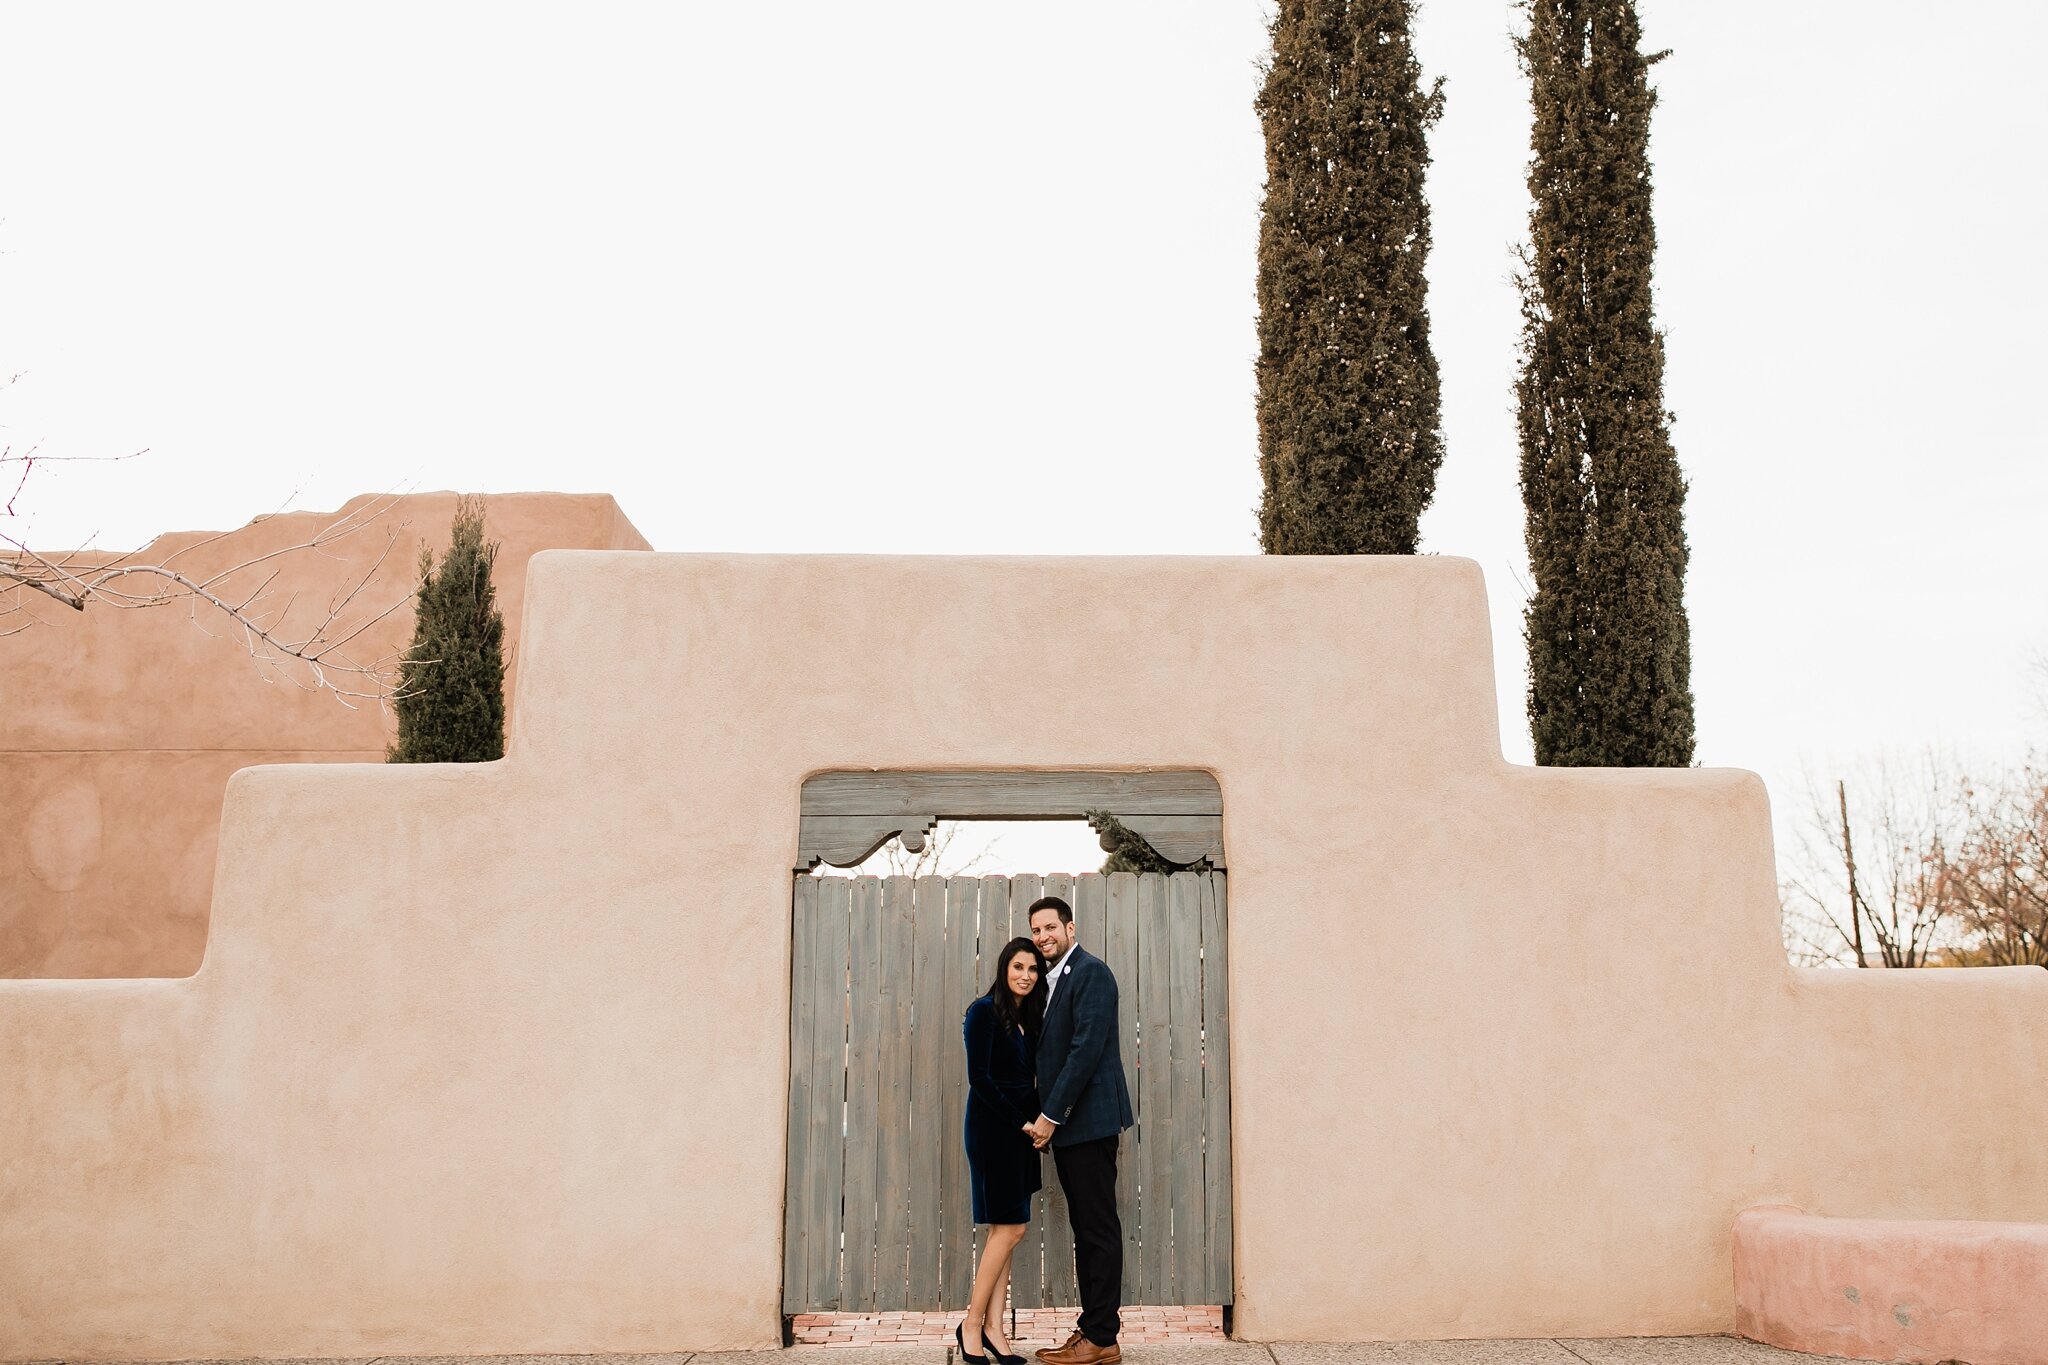 Alicia+lucia+photography+-+albuquerque+wedding+photographer+-+santa+fe+wedding+photography+-+new+mexico+wedding+photographer+-+new+mexico+wedding+-+albuquerque+engagement+-+old+town+engagement+-+christmas+engagement+-+holiday+engagement_0027.jpg